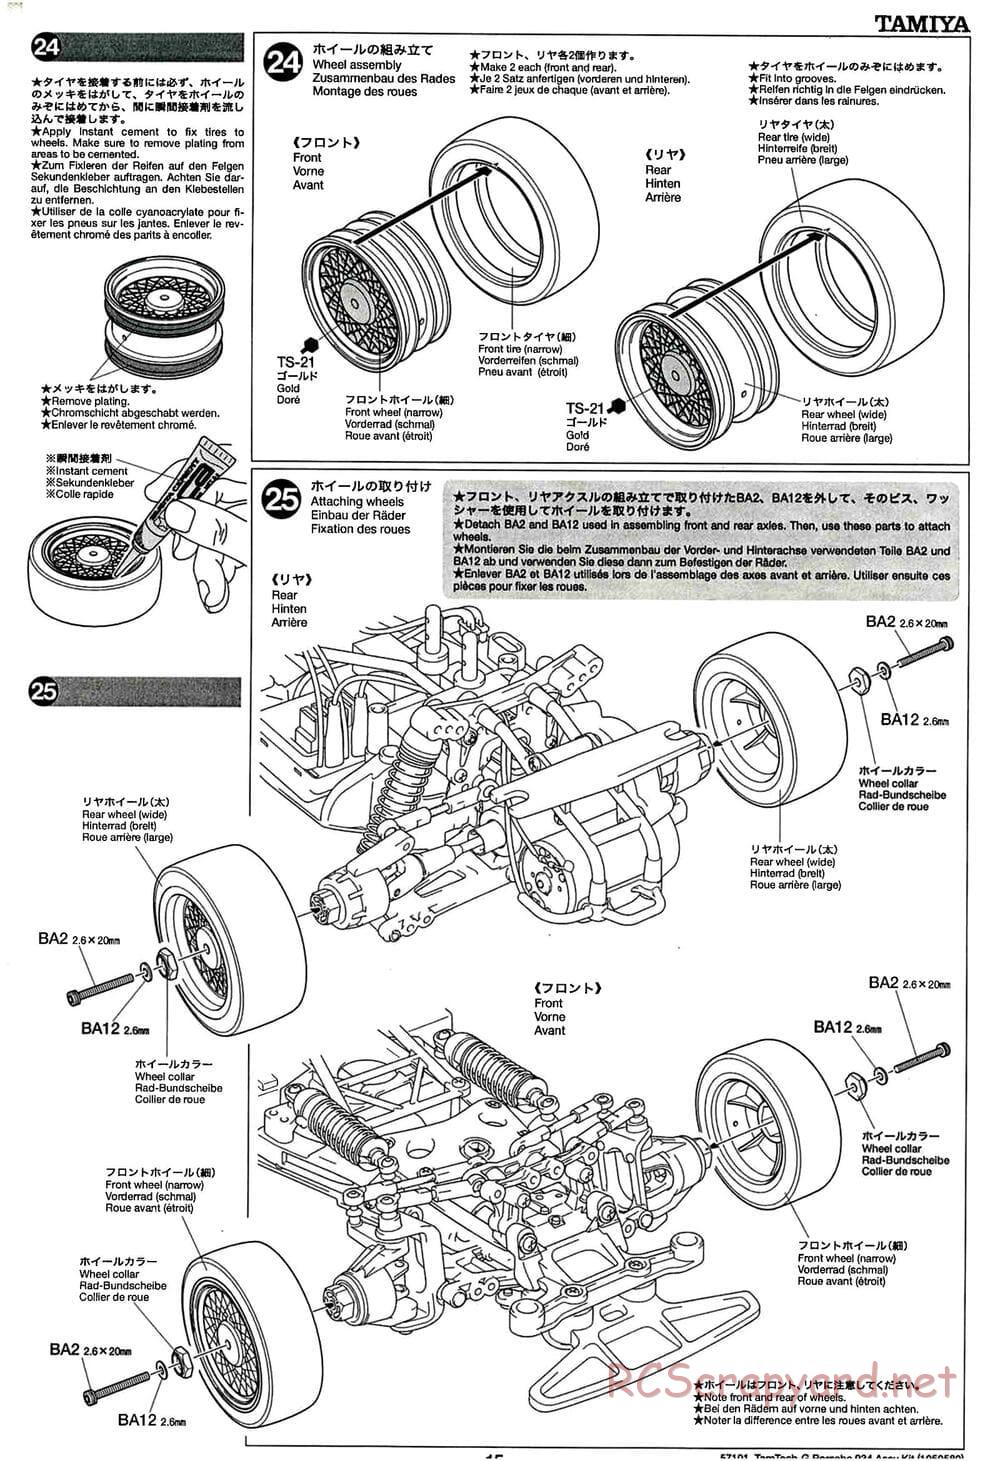 Tamiya - Porsche Turbo RSR - GT-01 Chassis - Manual - Page 15